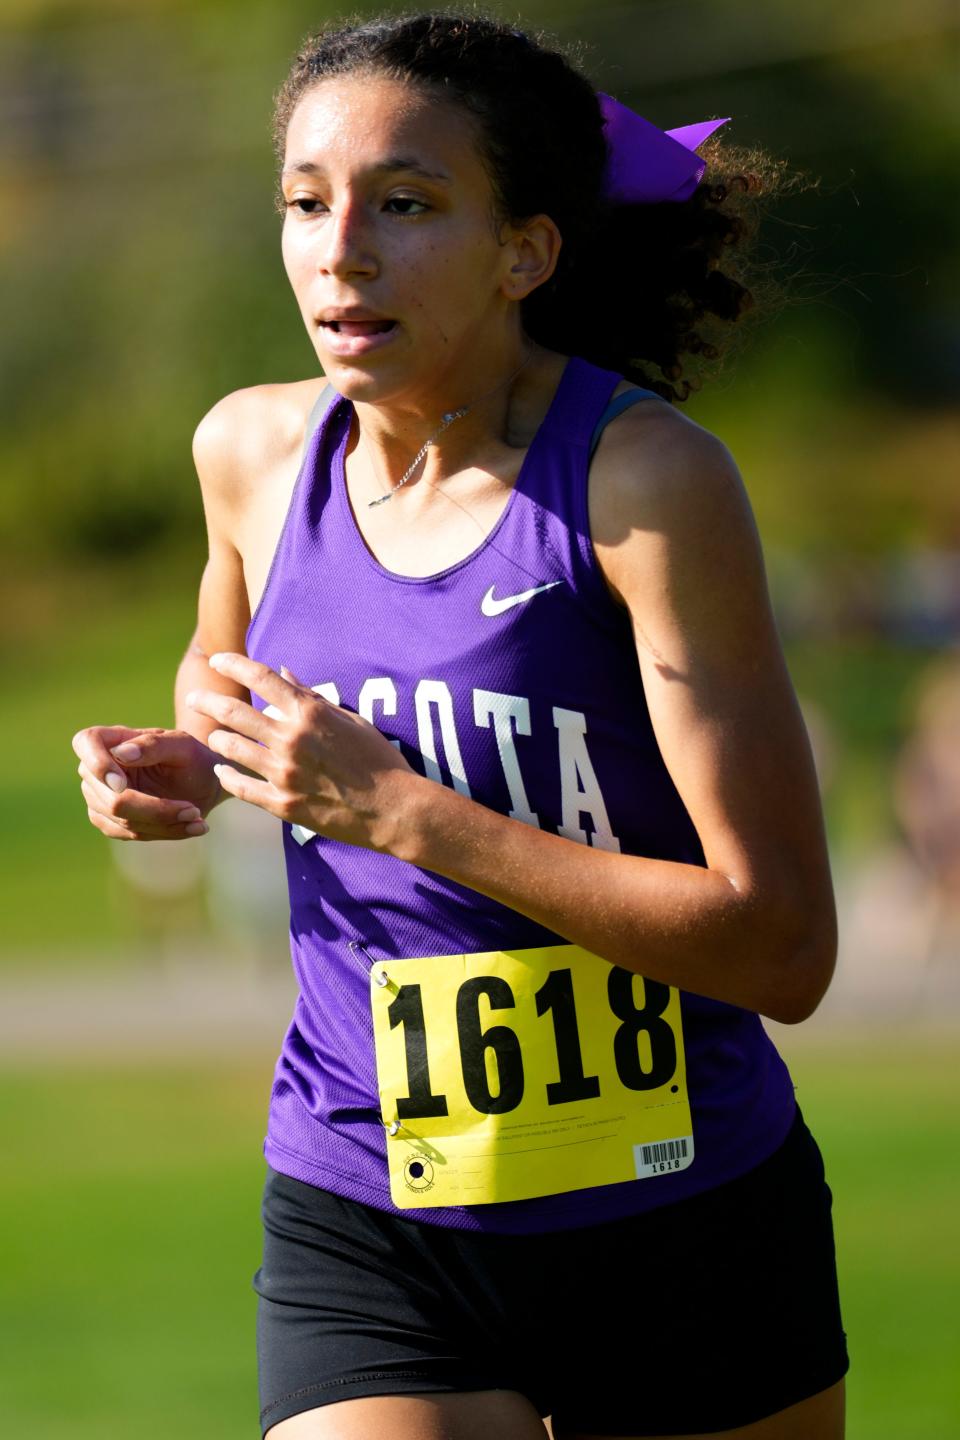 Isabel Michel, of Bogota, is shown on her way to victory at the Patriot Girls NJIC Divisional Championship, with a time of 21:13, at Garret Mountain Reservation, Wednesday, October 4, 2023.